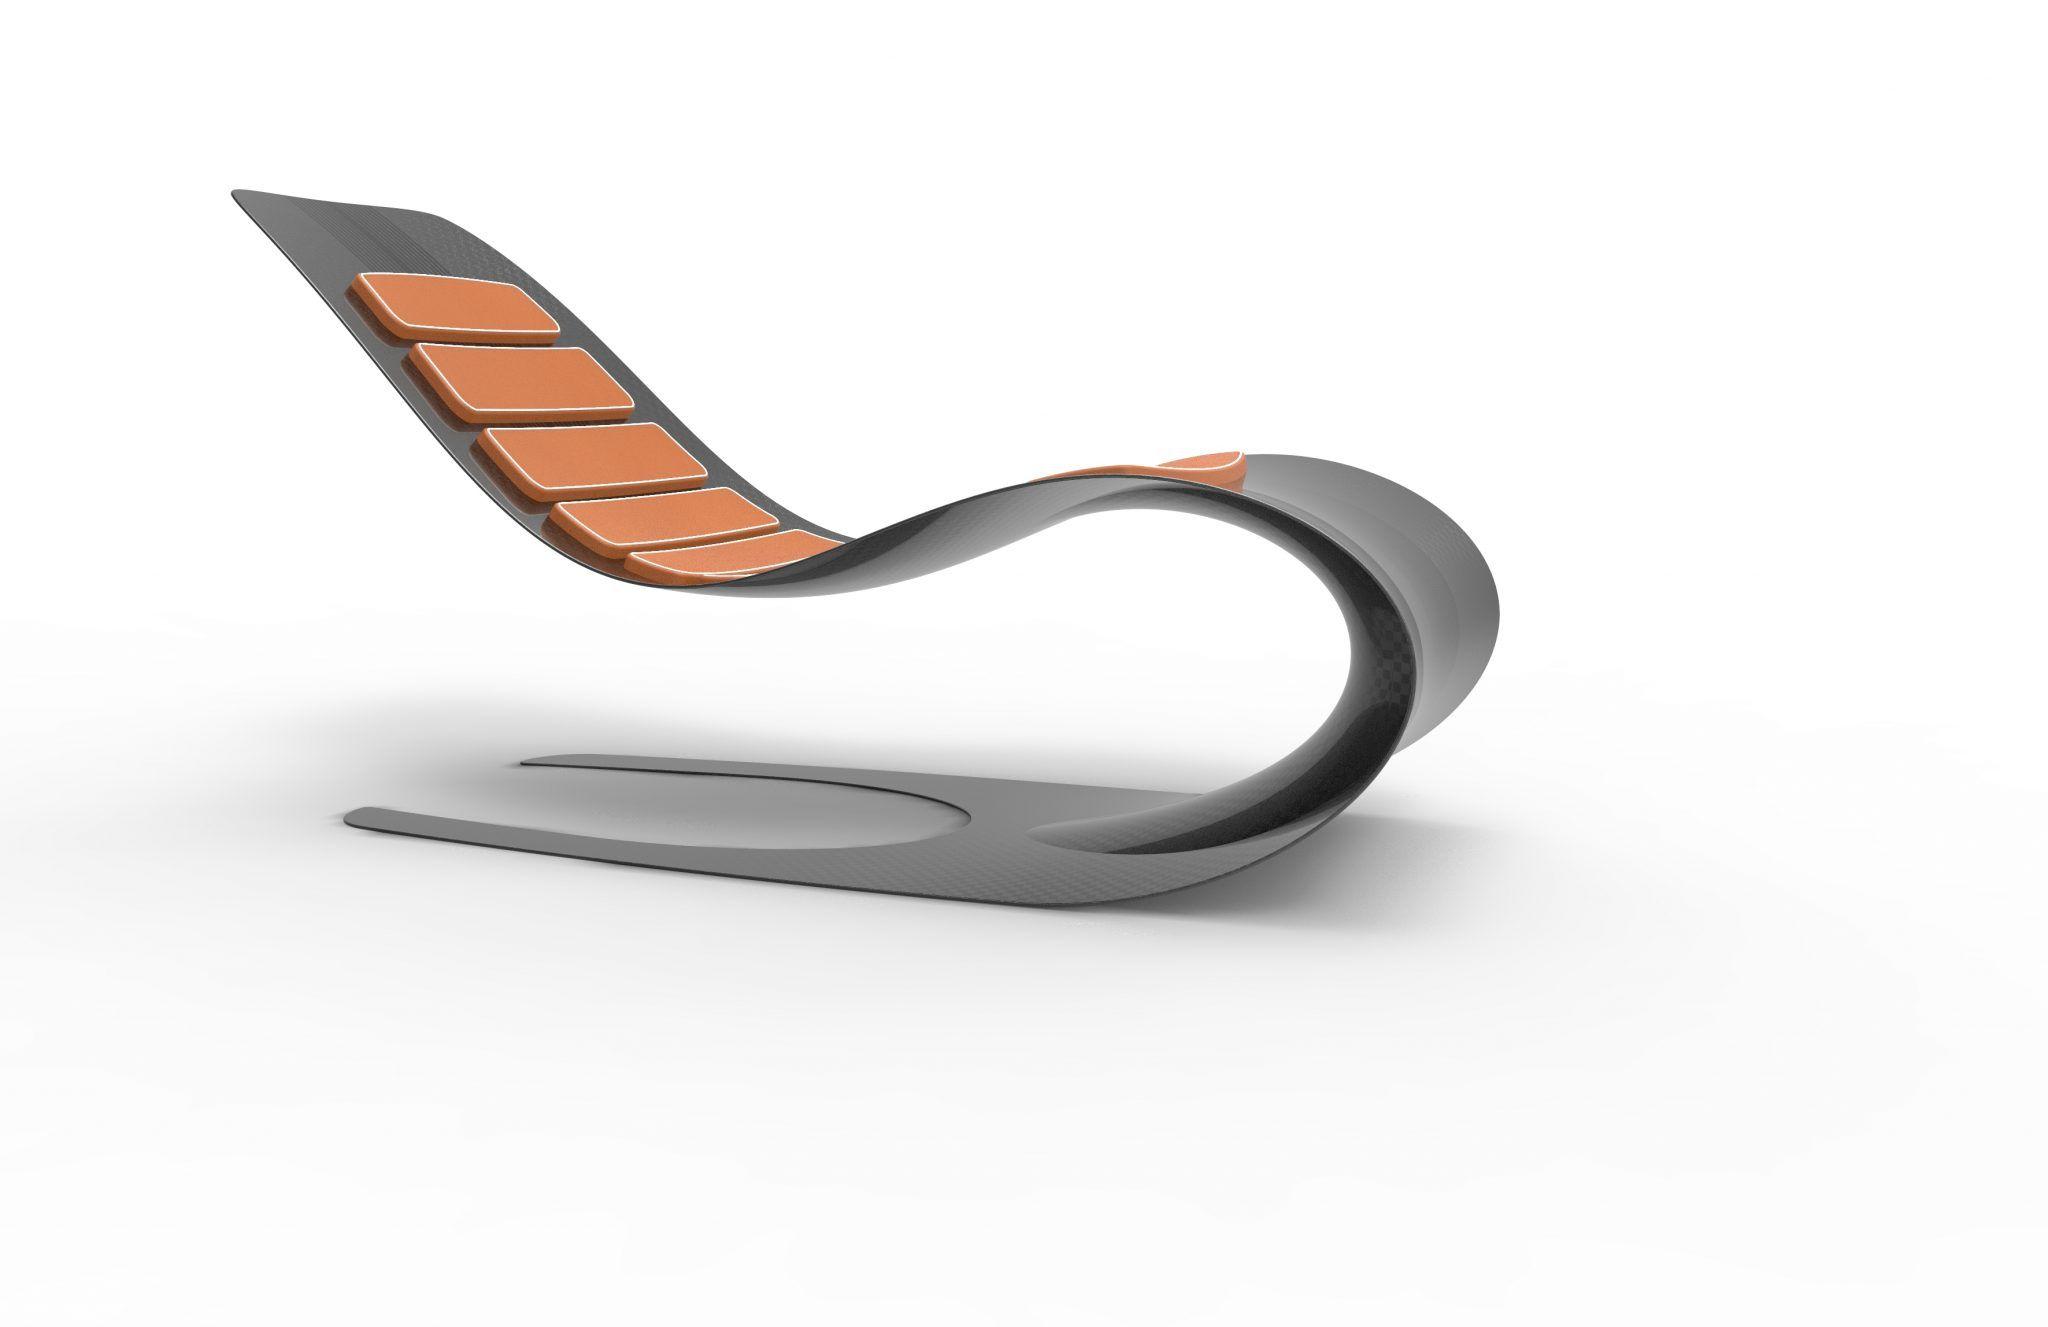 Uber Cool Logo - New Chaise Longue looking uber-cool - Essence of Strength